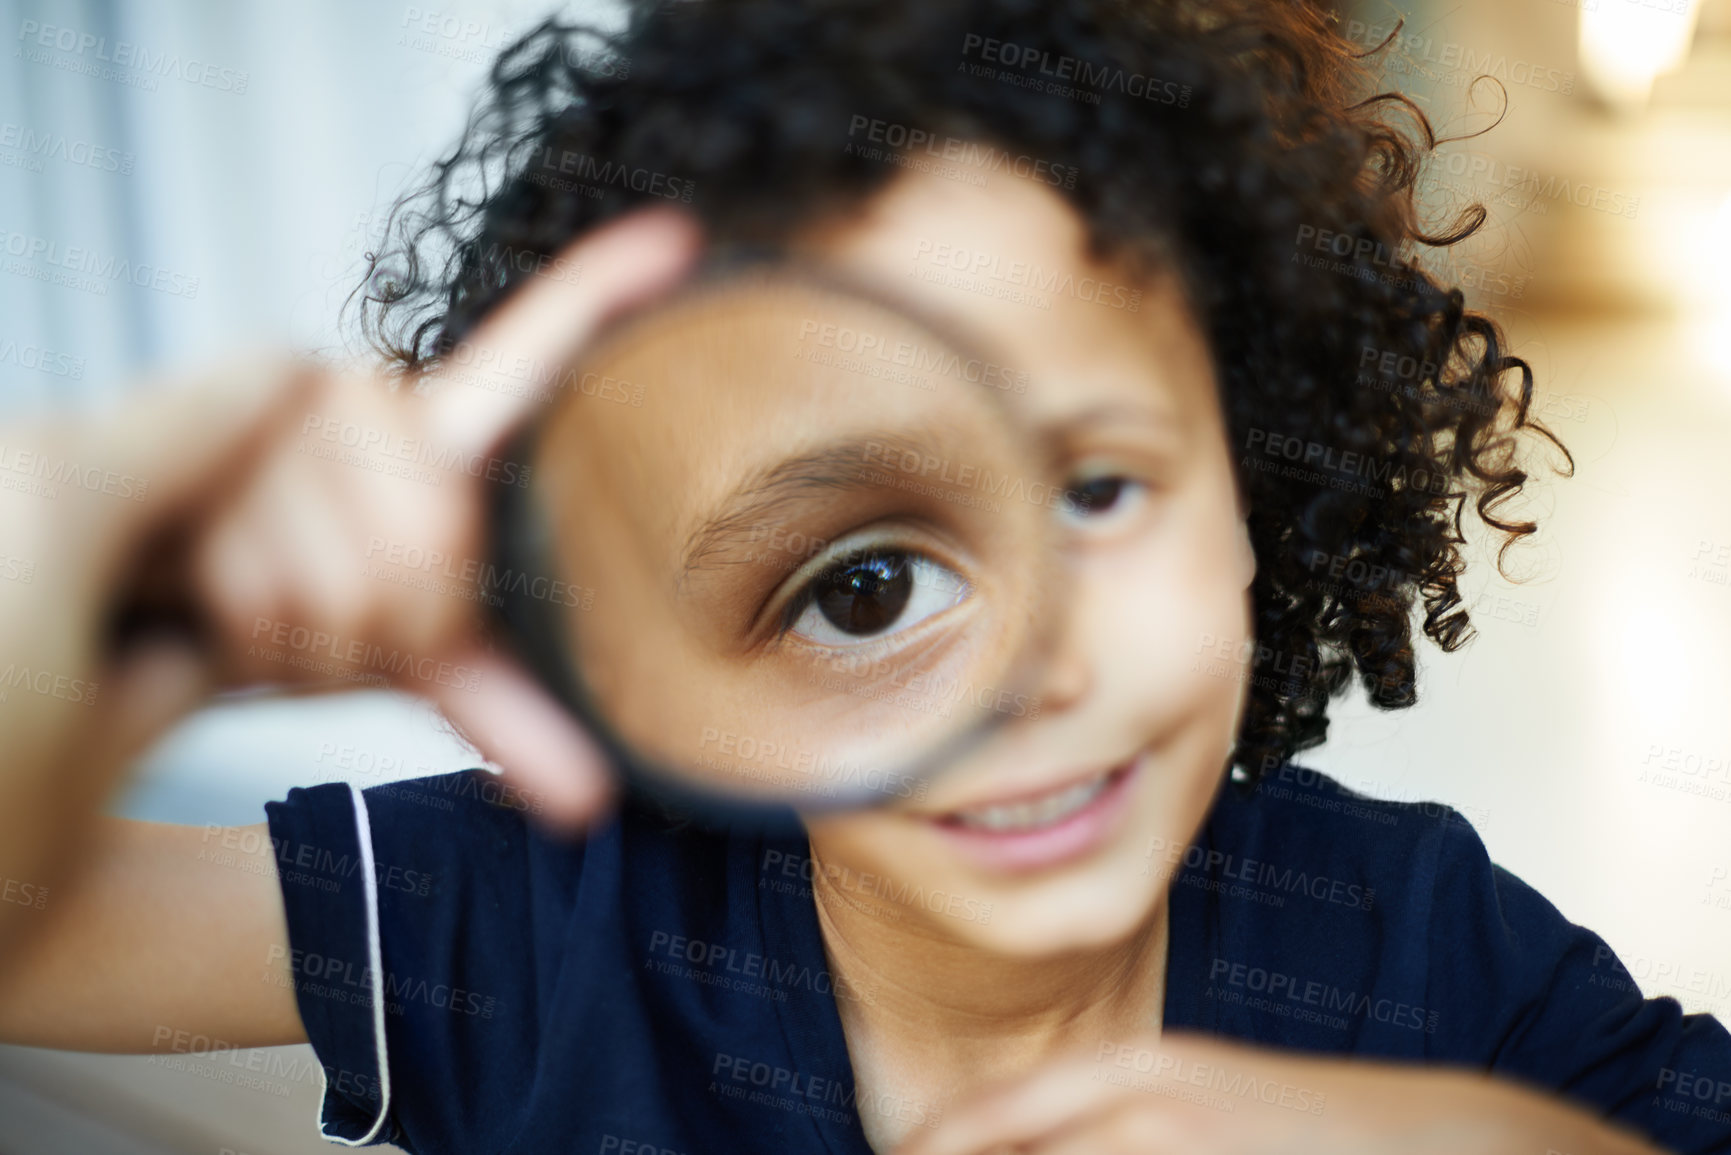 Buy stock photo Shot of a little boy holding a magnifying glass to his eye